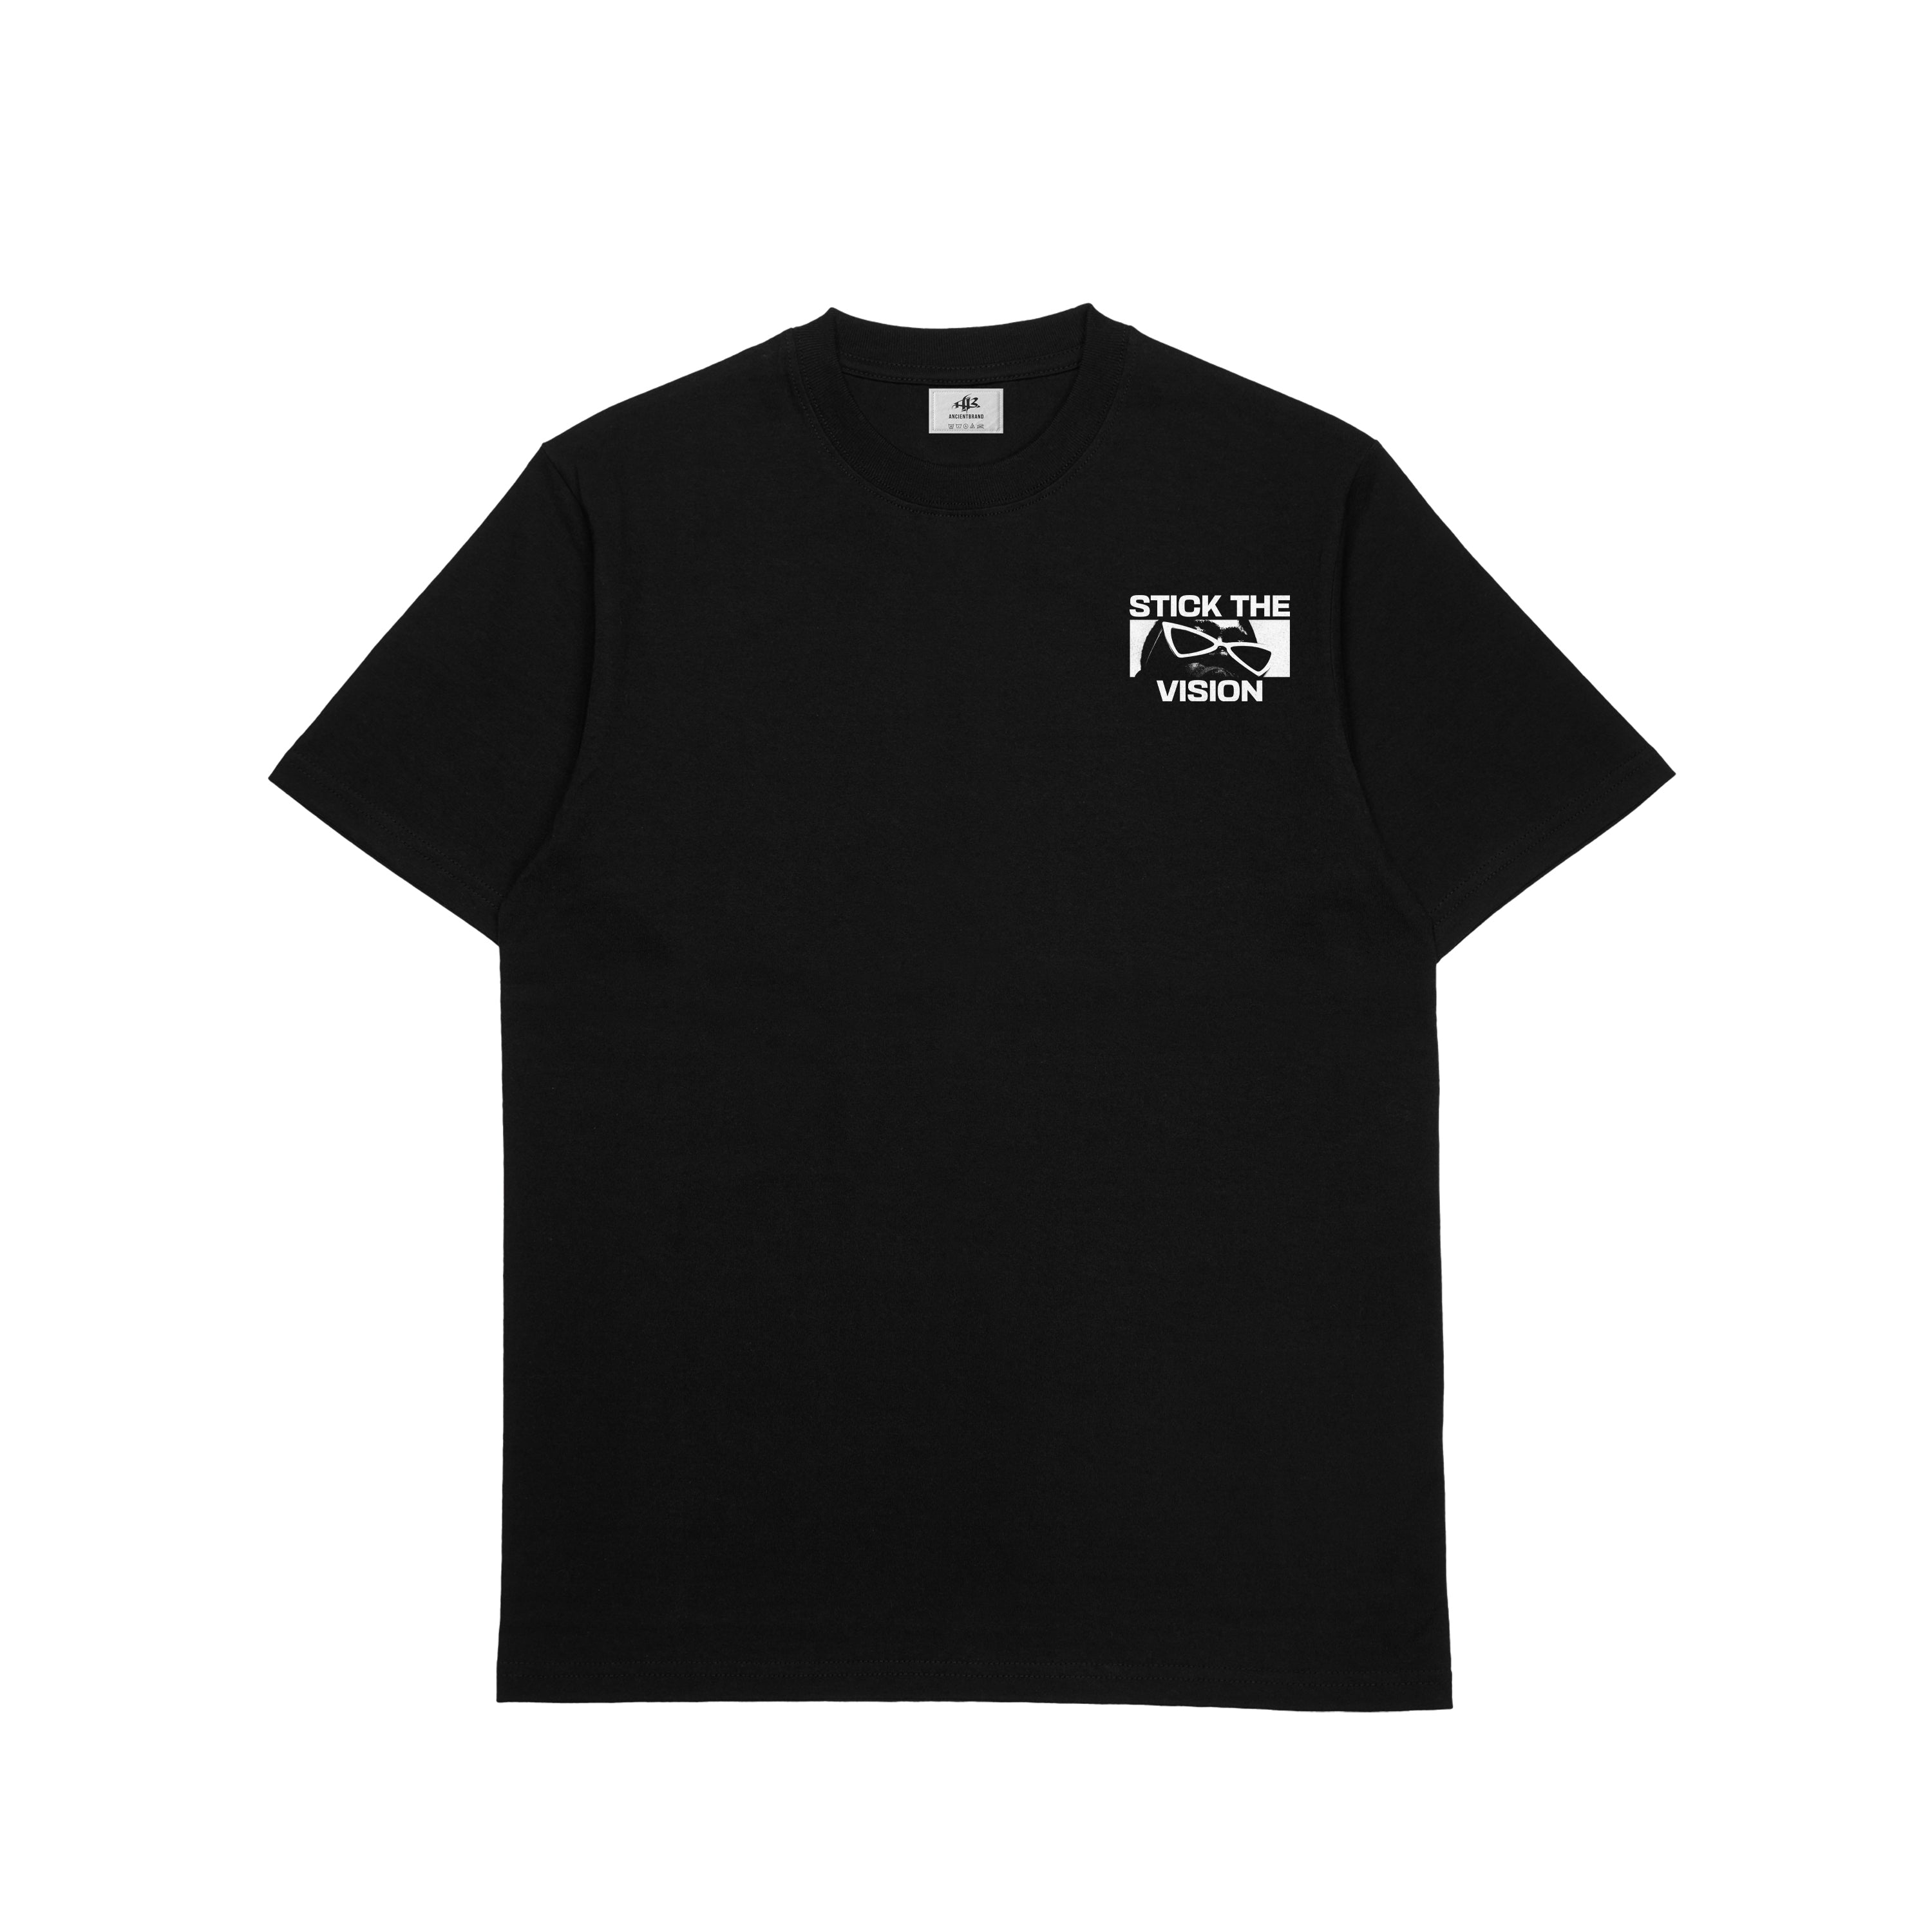 AncientBrand Stick the Vision Tee